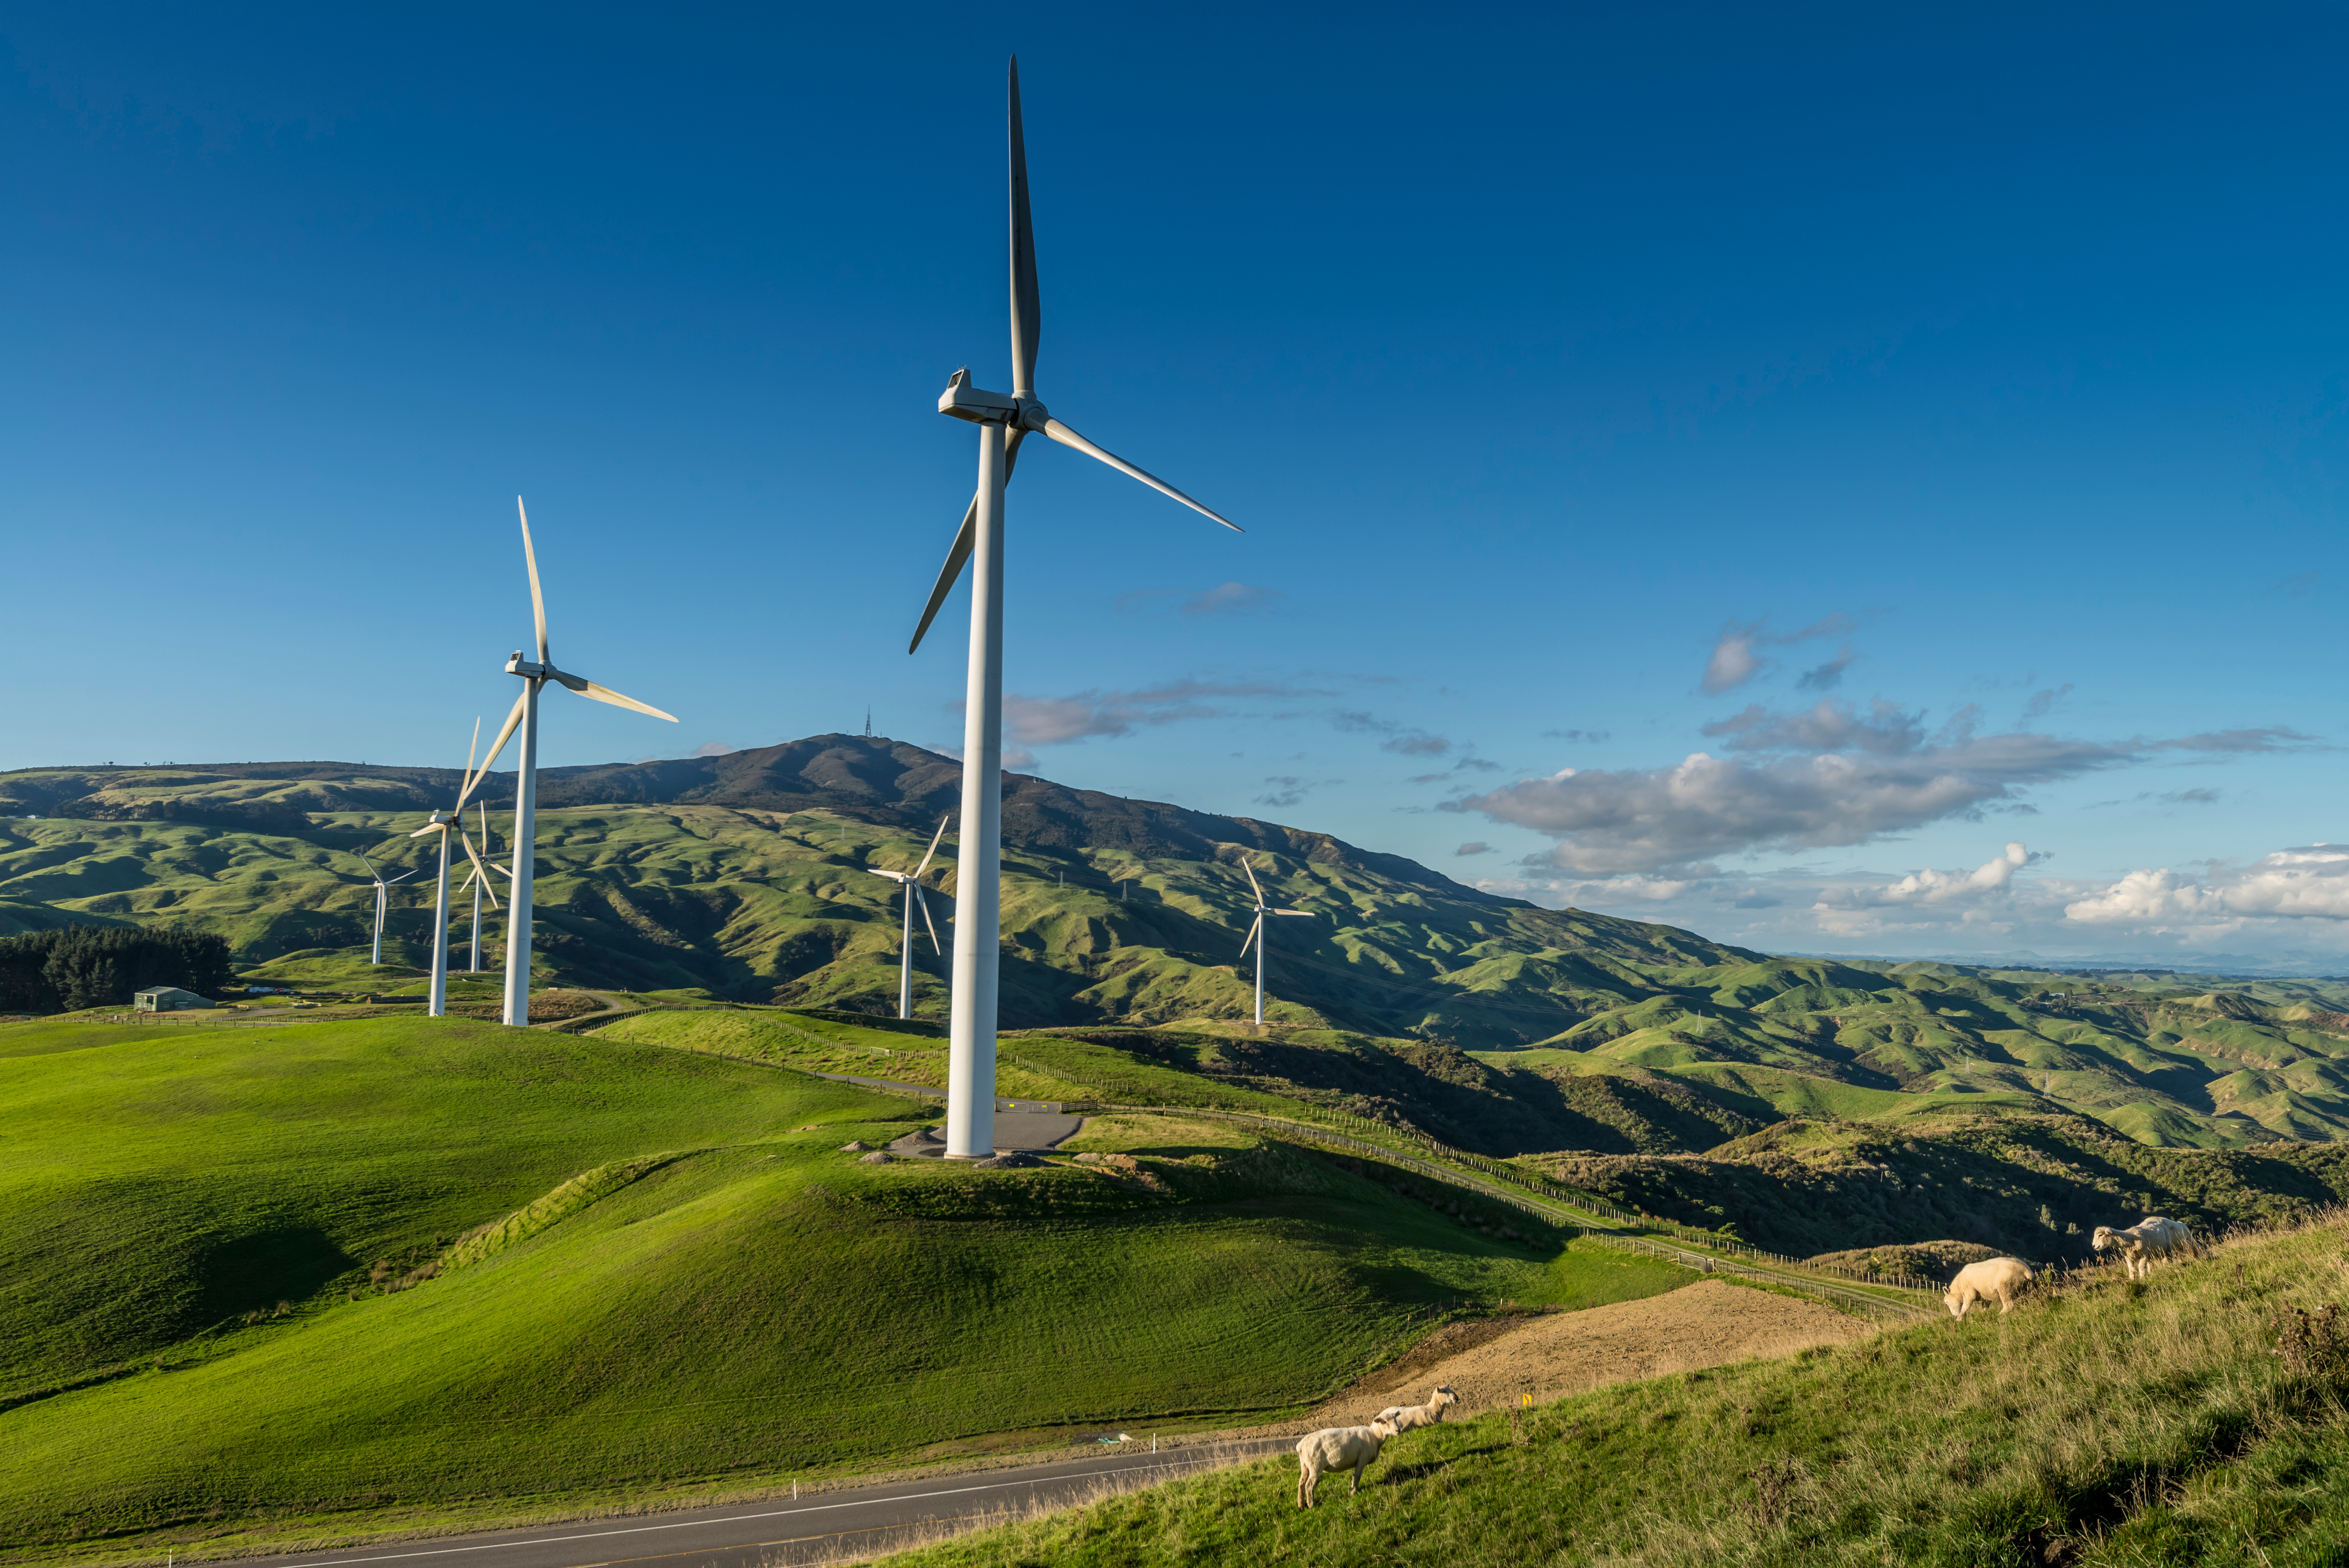 Image of wind turbines on rolling hills next to a road on a sunny day in New Zealand, with sheep in the foreground